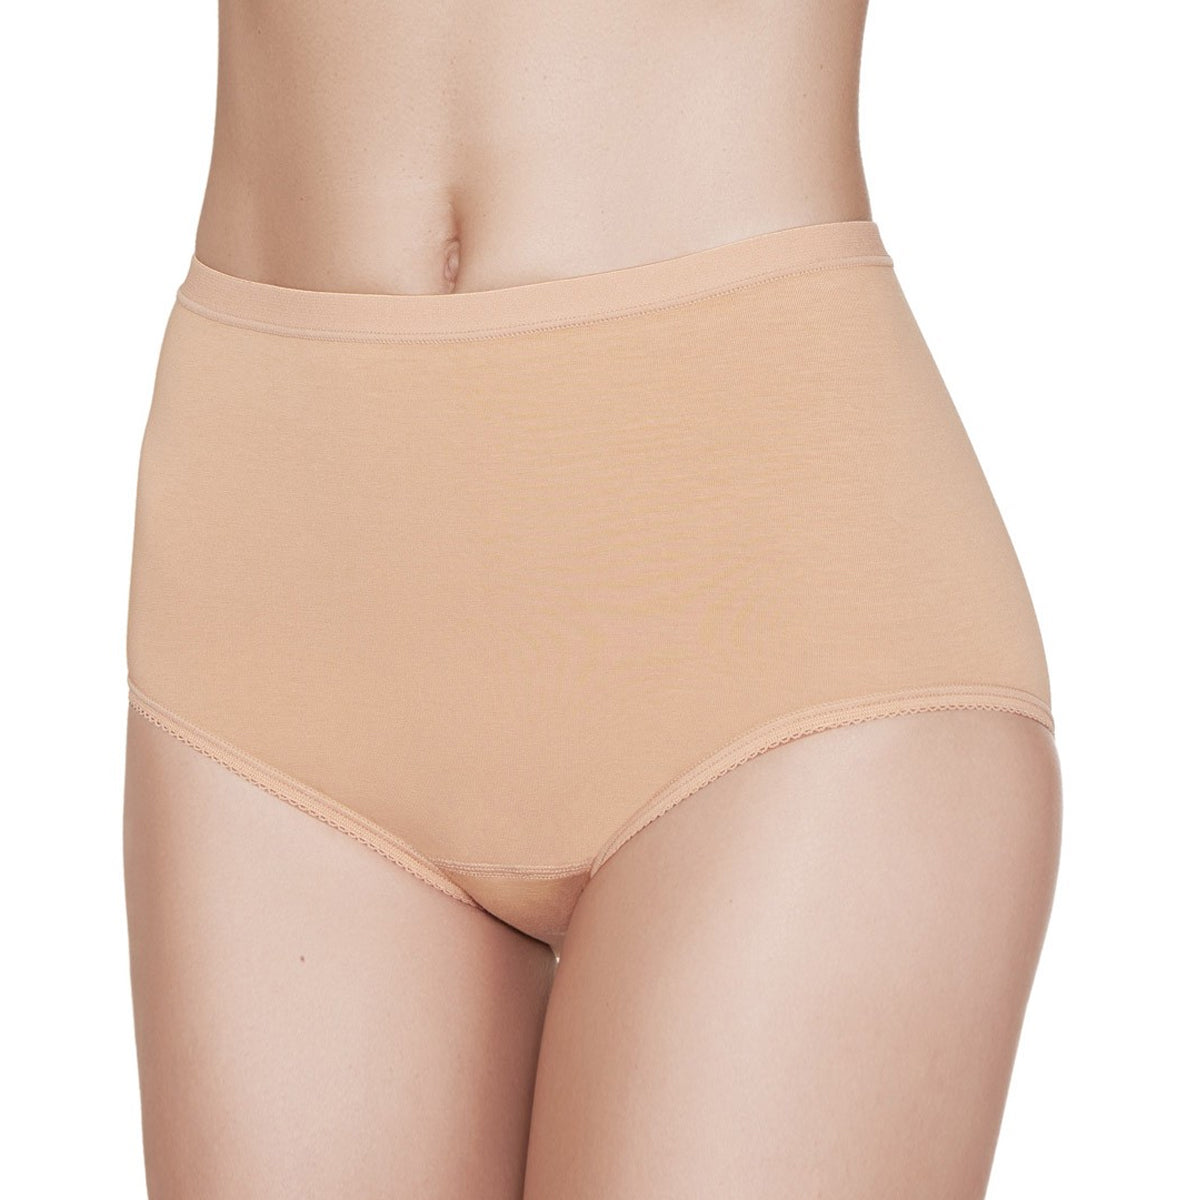  Nude Panties Womens Cotton Underwear Cotton Panty For